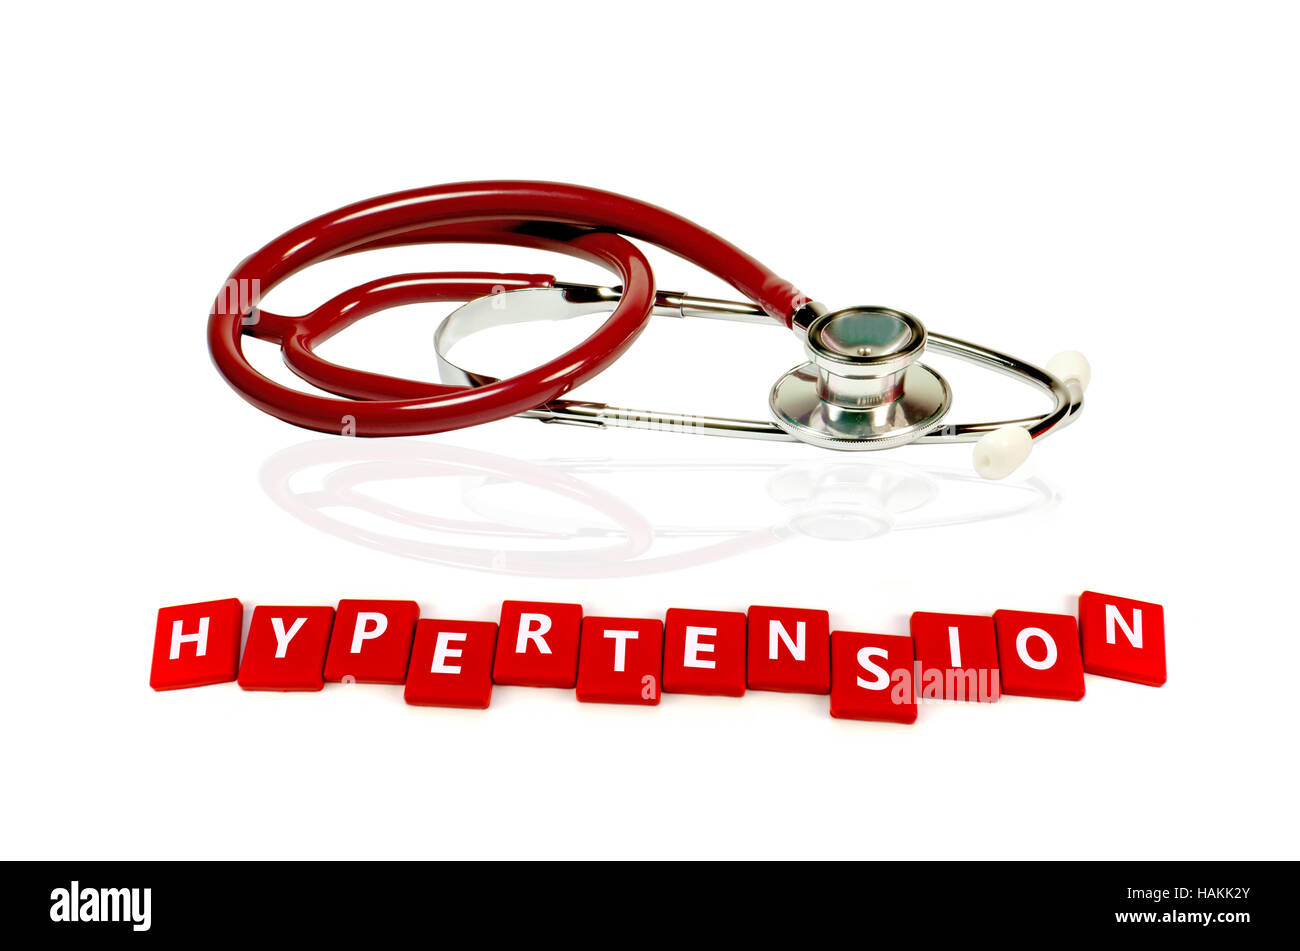 Hypertension treatment concept with stethoscope on white background. Stock Photo